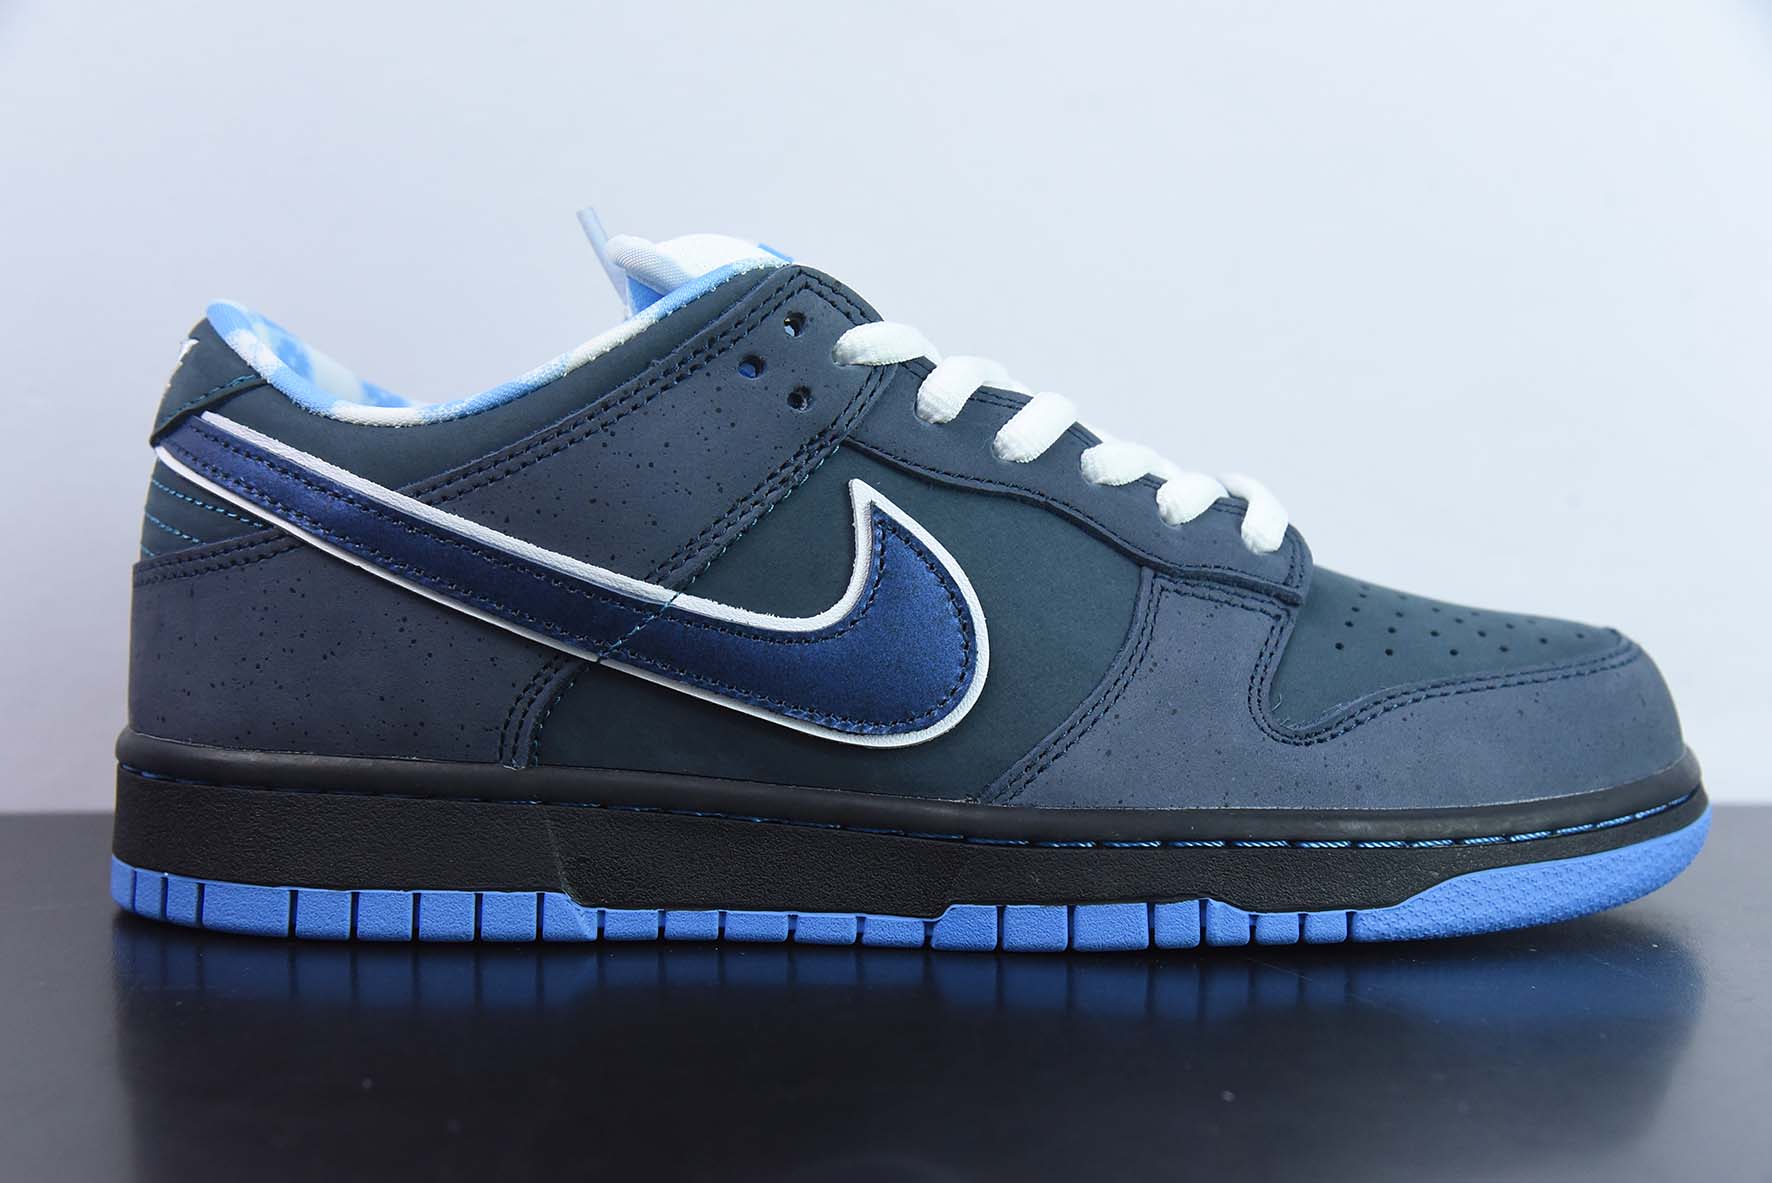 NIKE SB DUNK LOW CONCEPTS – “BLUE LOBSTER”